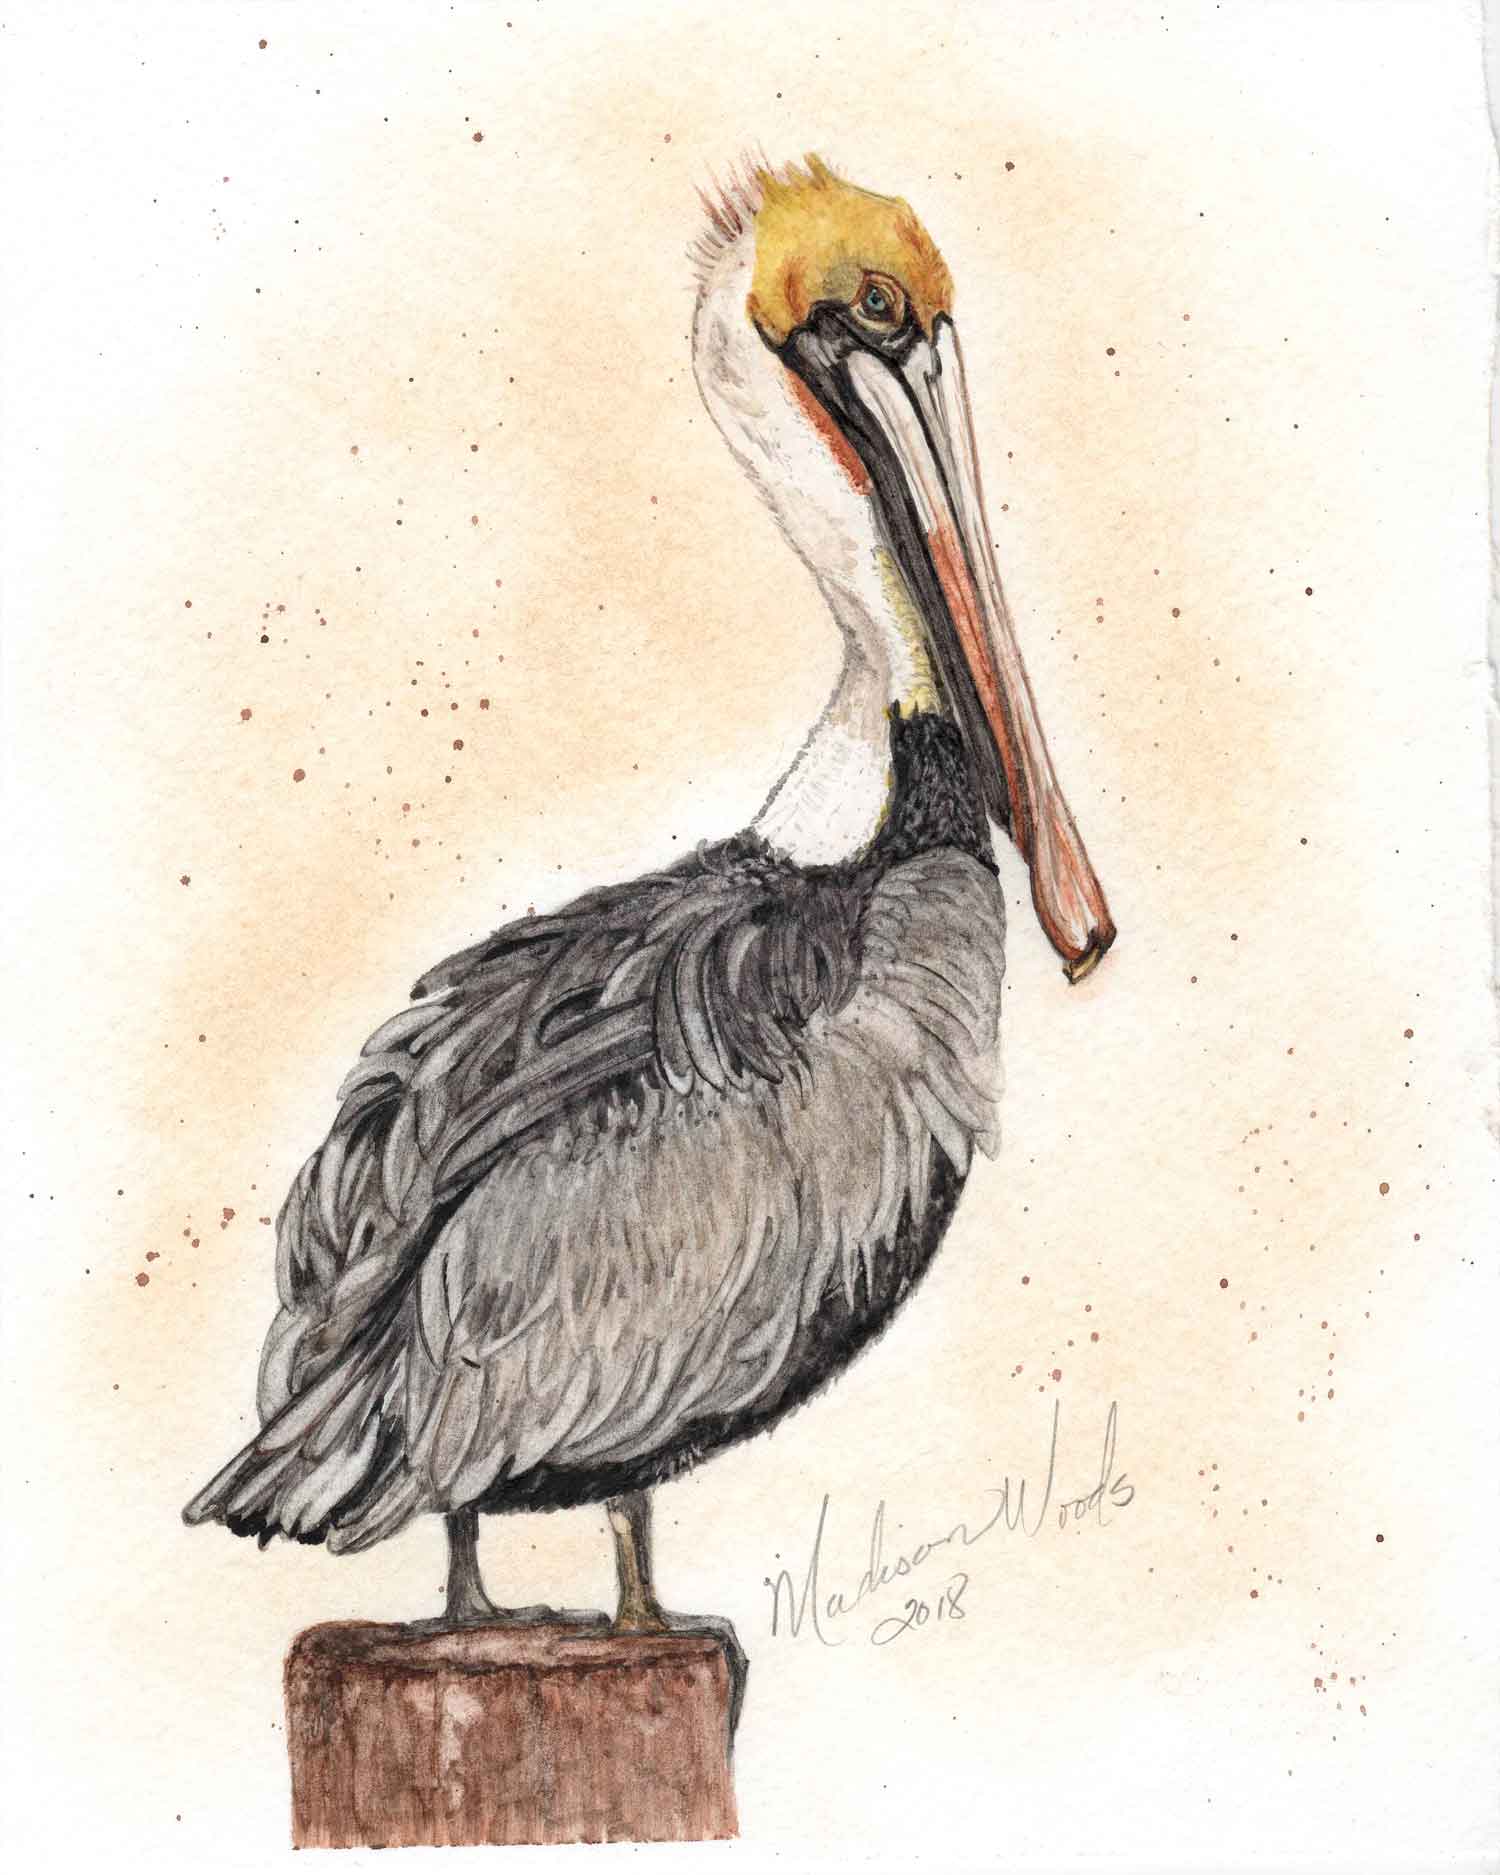 My painting of a brown pelican using Ozark pigments.